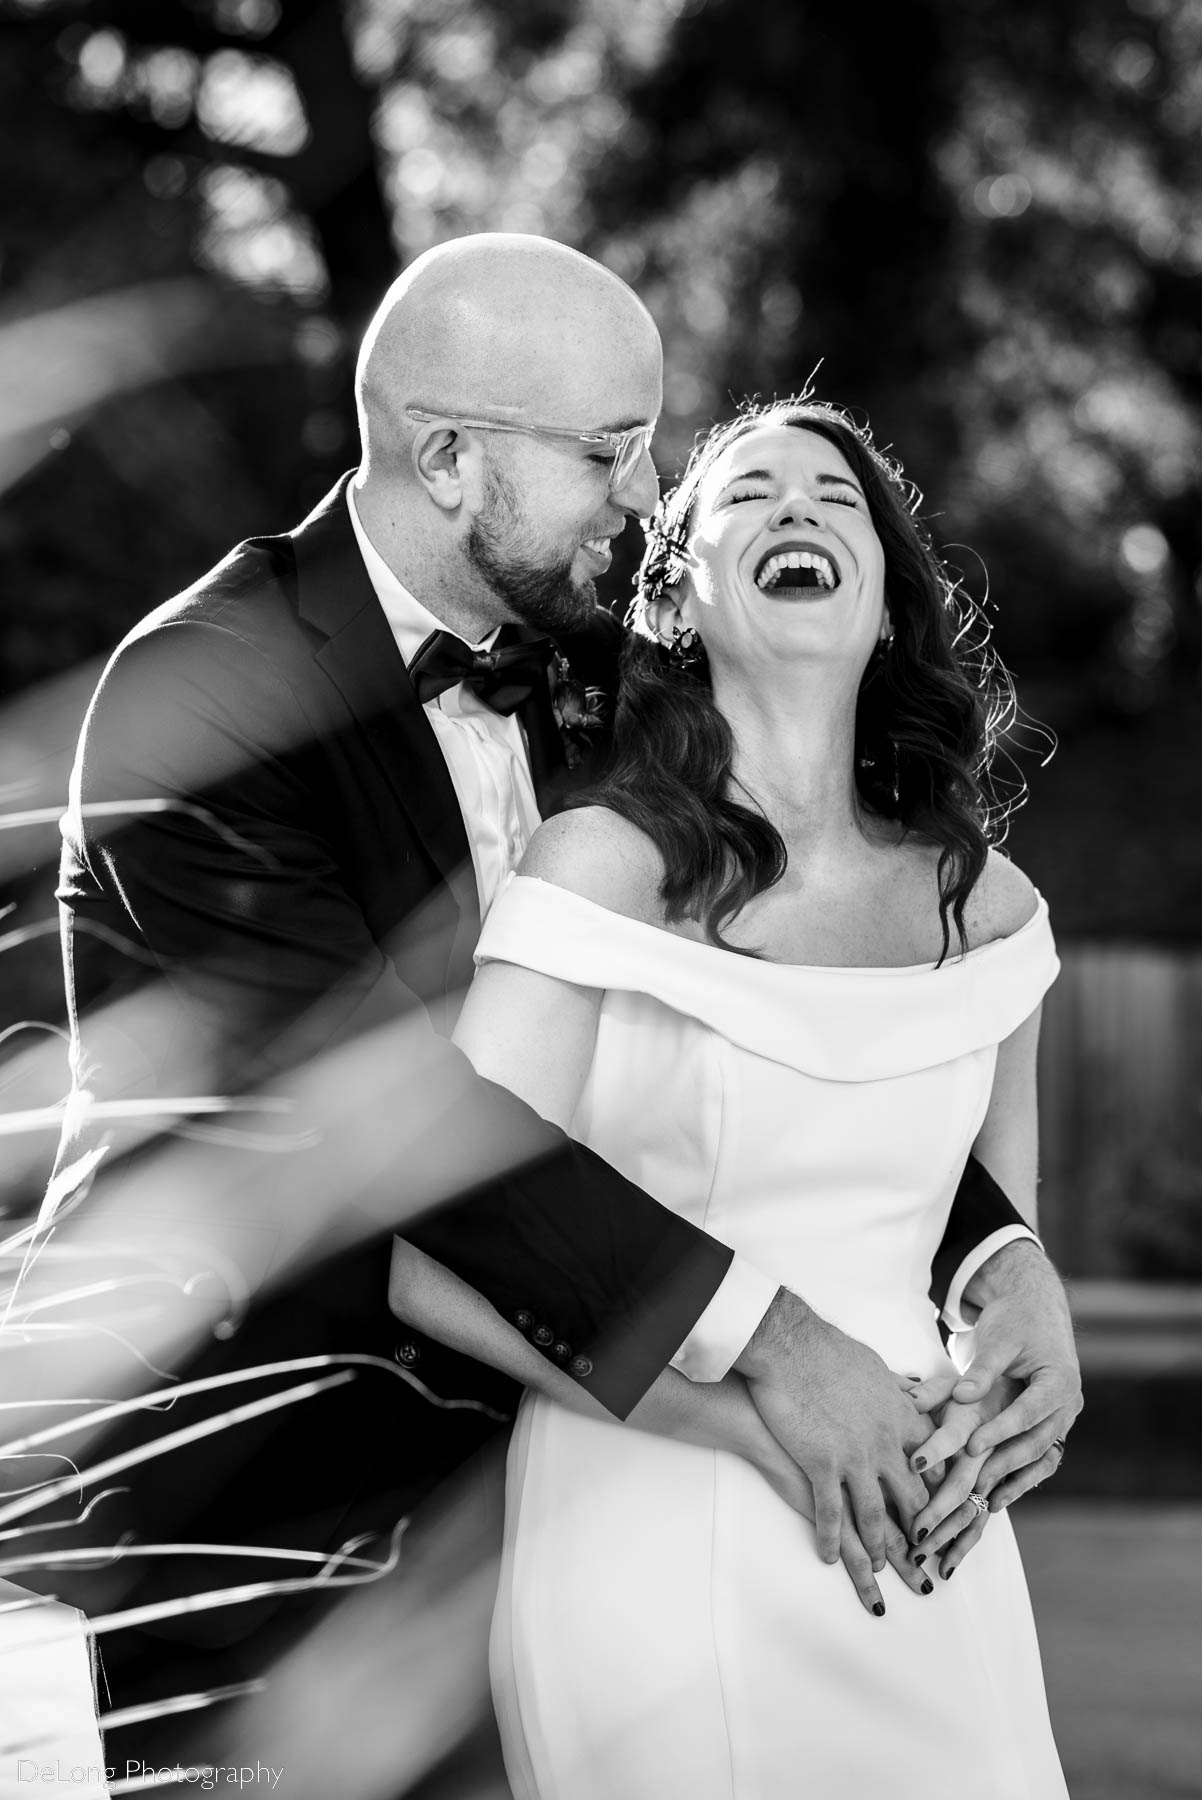 Black and white image of a smiling groom with his arms around his laughing bride outside Eventide Brewing in Atlanta, GA by Charlotte wedding photographers DeLong Photography